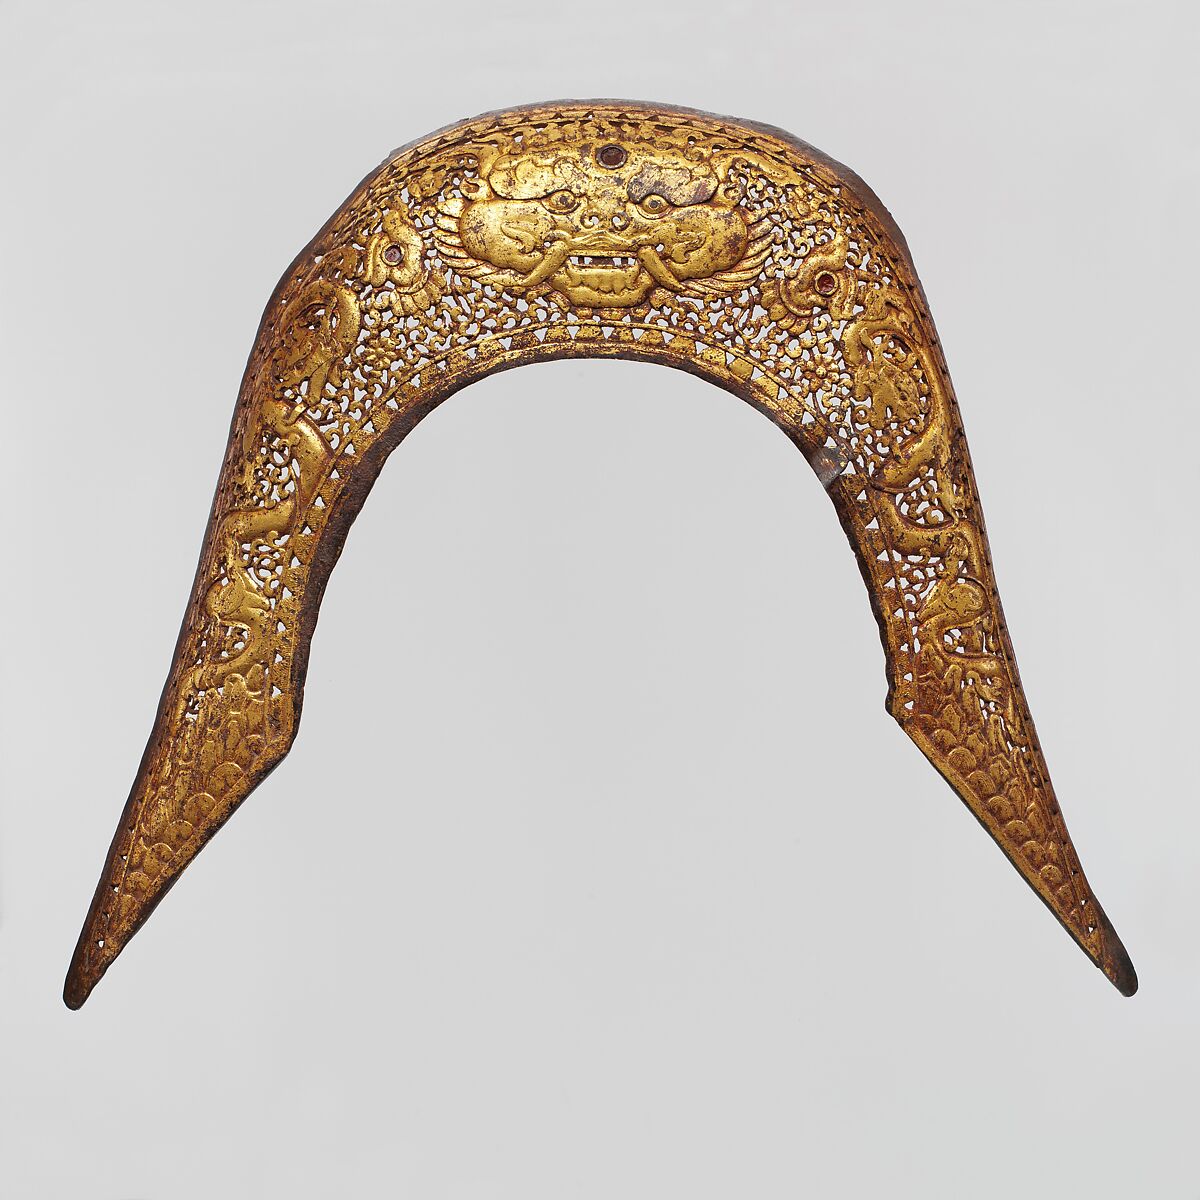 Pommel Plate from a Saddle, Iron, gold, Tibetan 